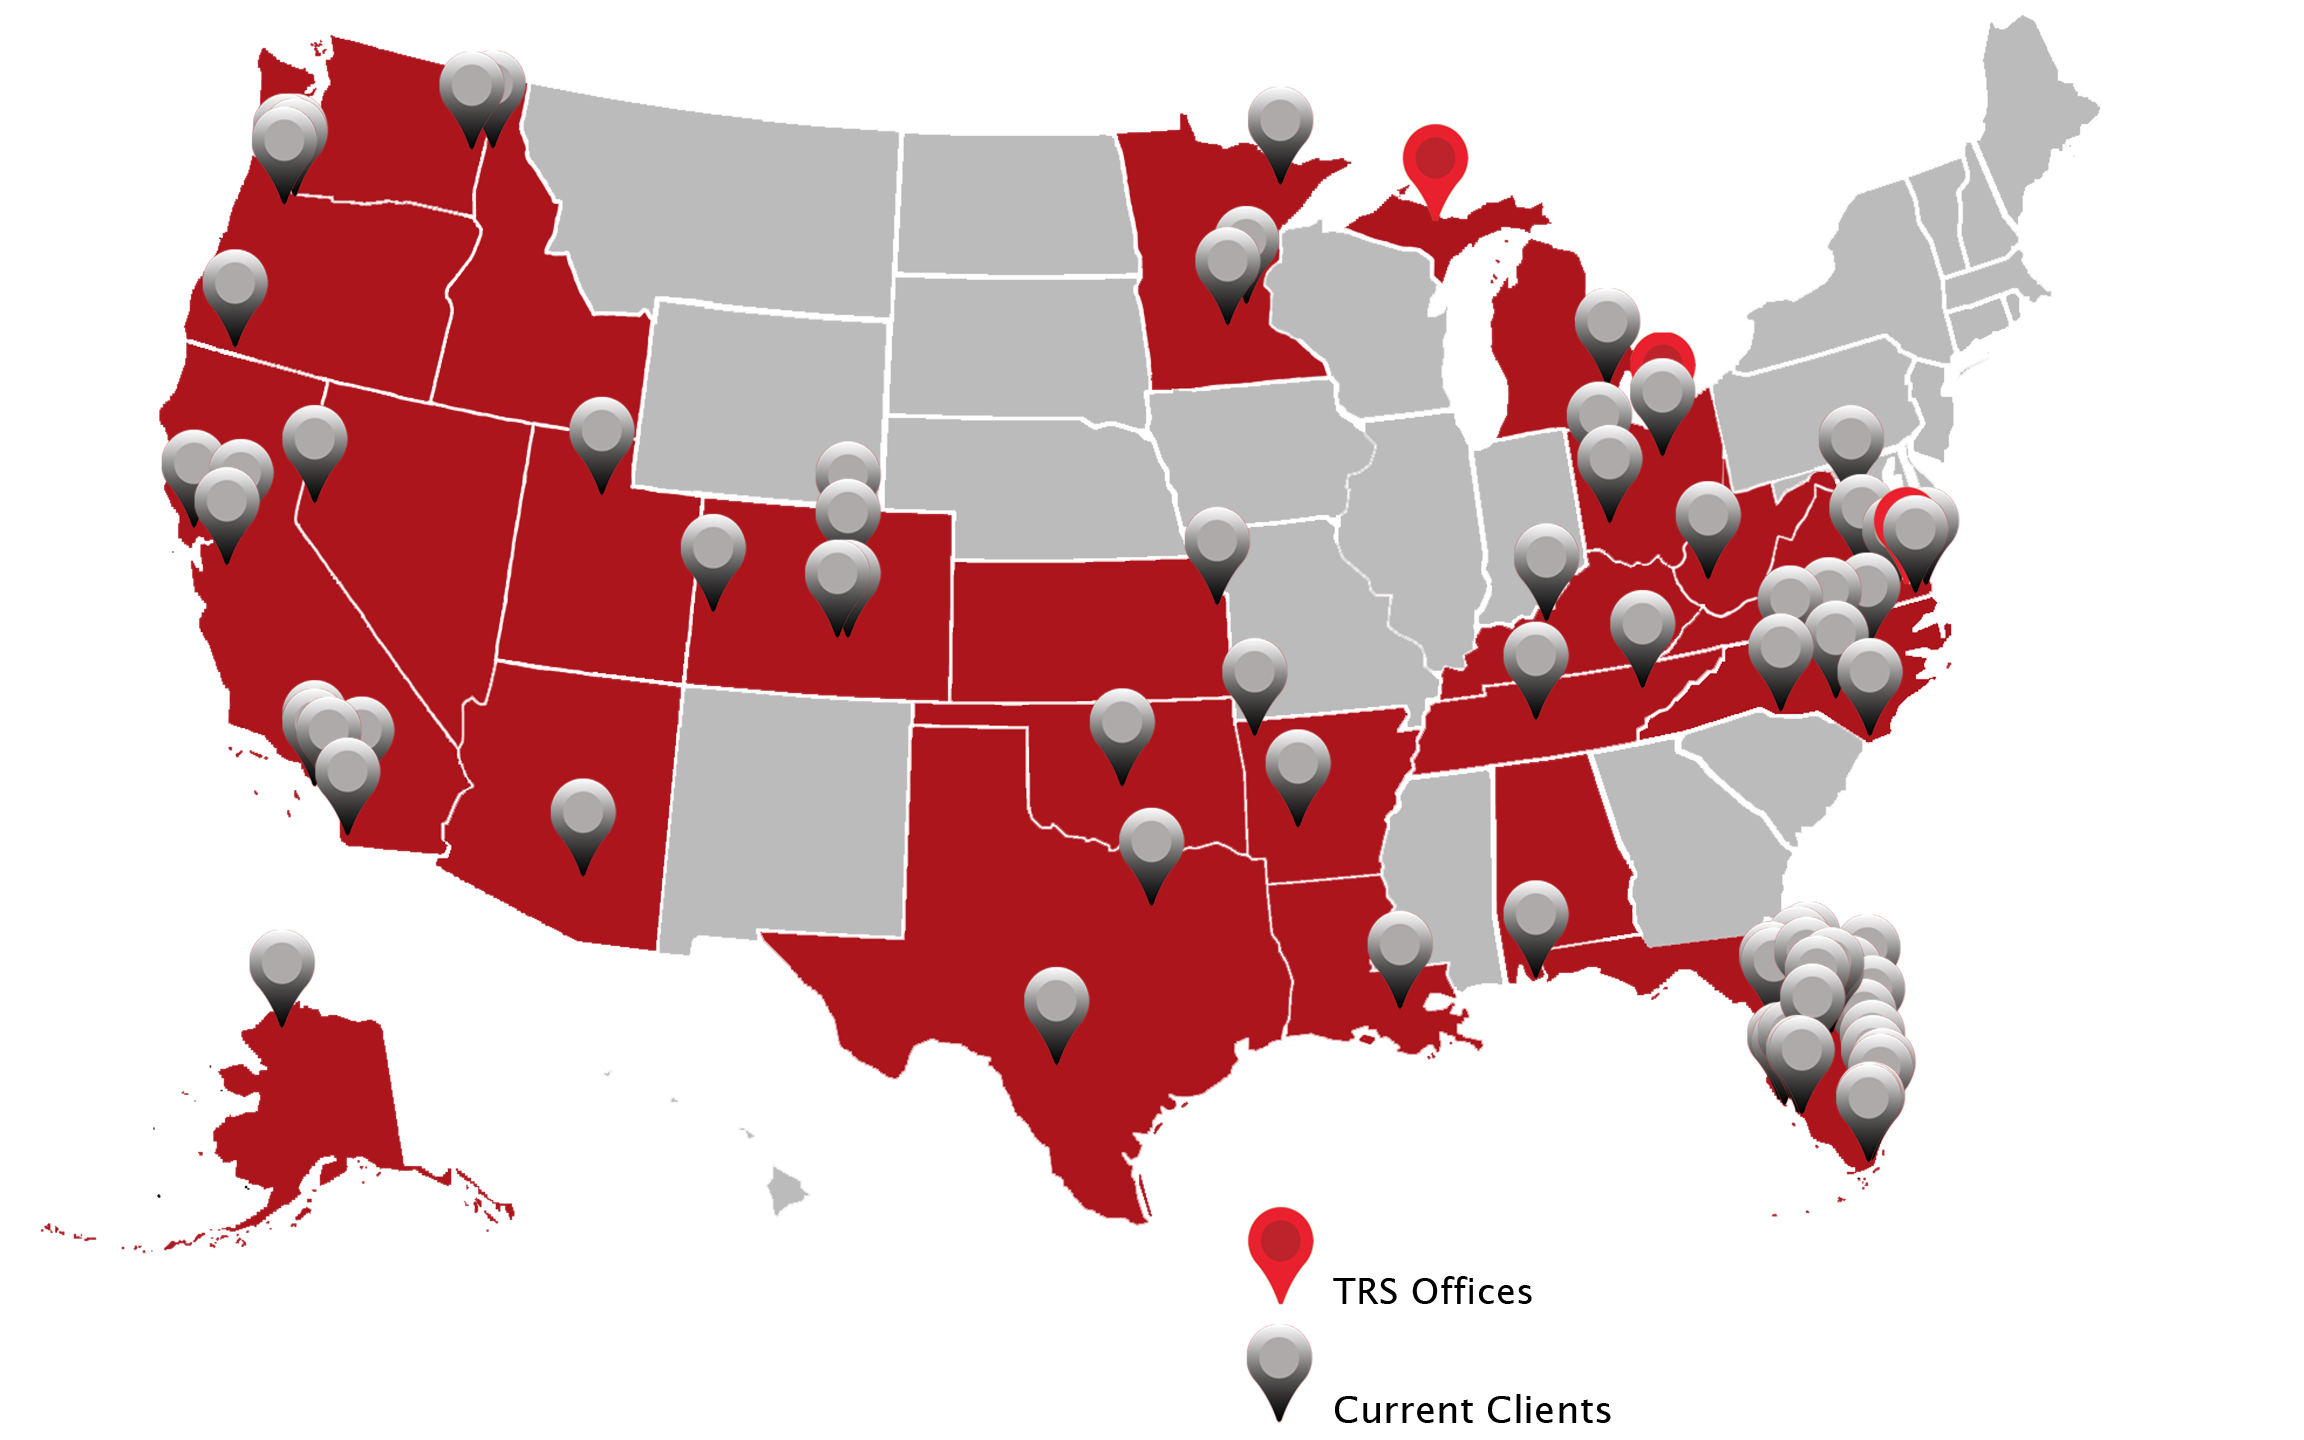 Map of the United States with markers placed at each client’s location. There are over 90 clients across 24 states.